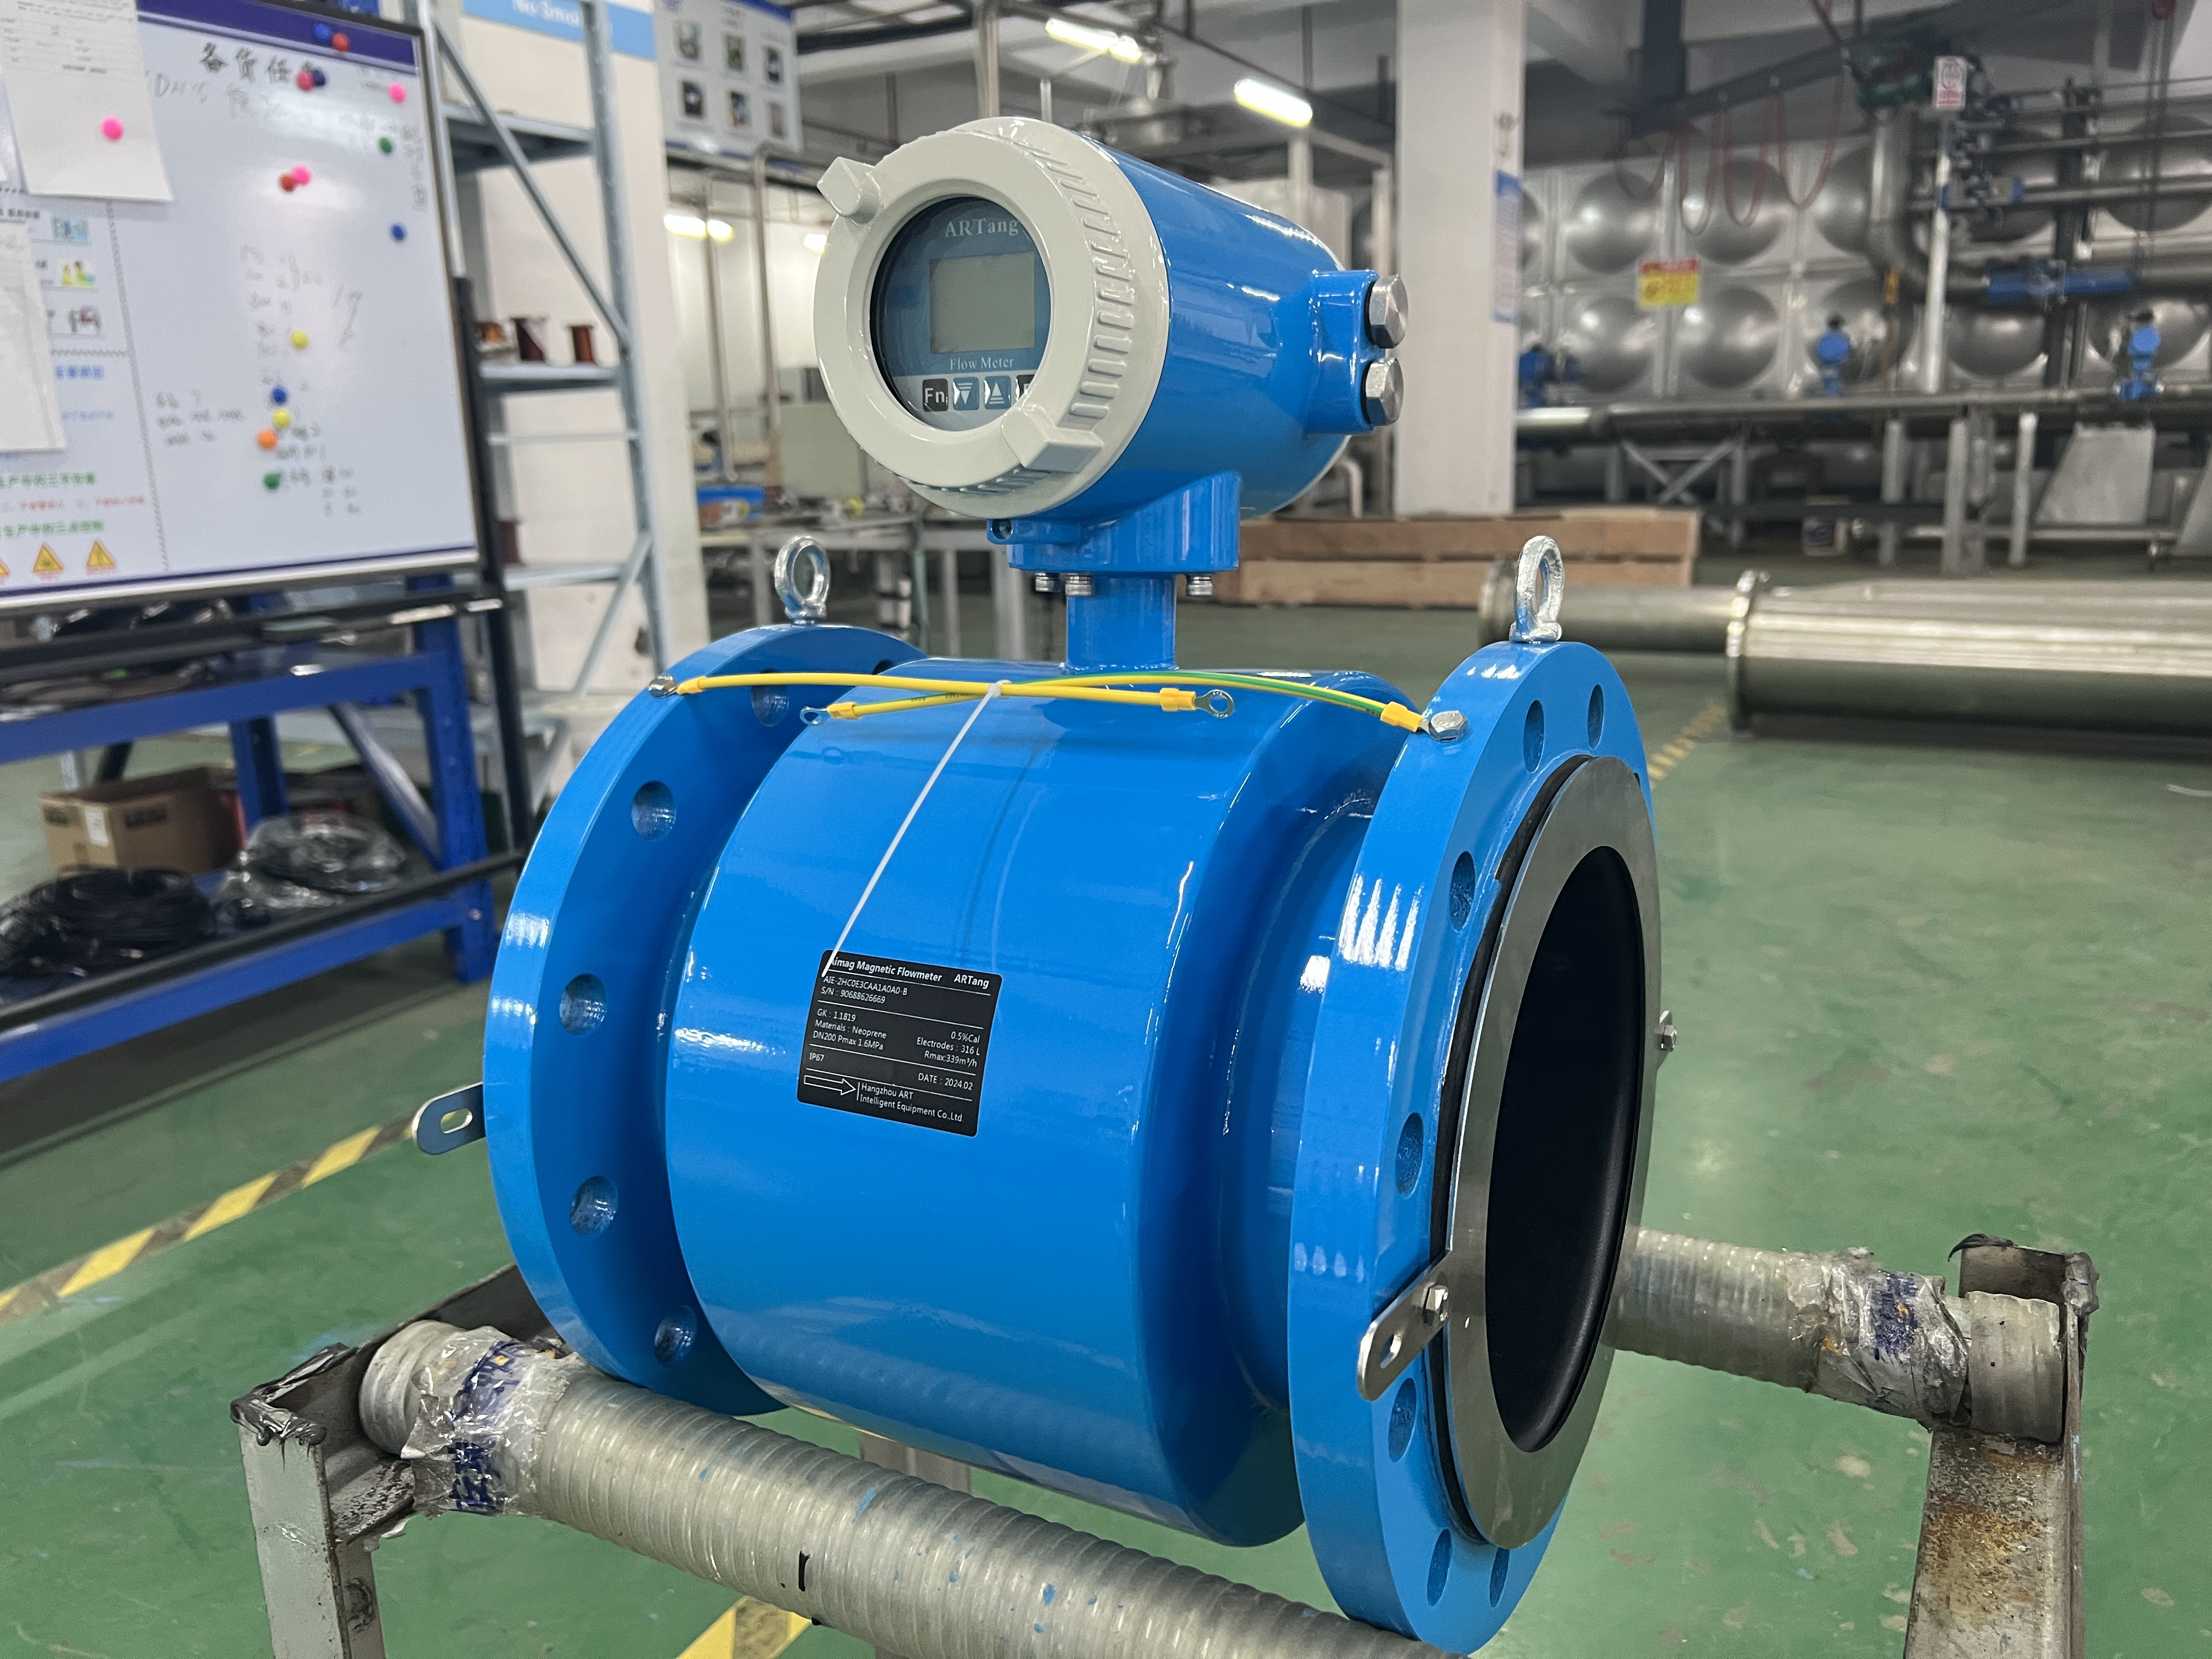 How to clean the dirt and impurities on the electromagnetic flow meter body?